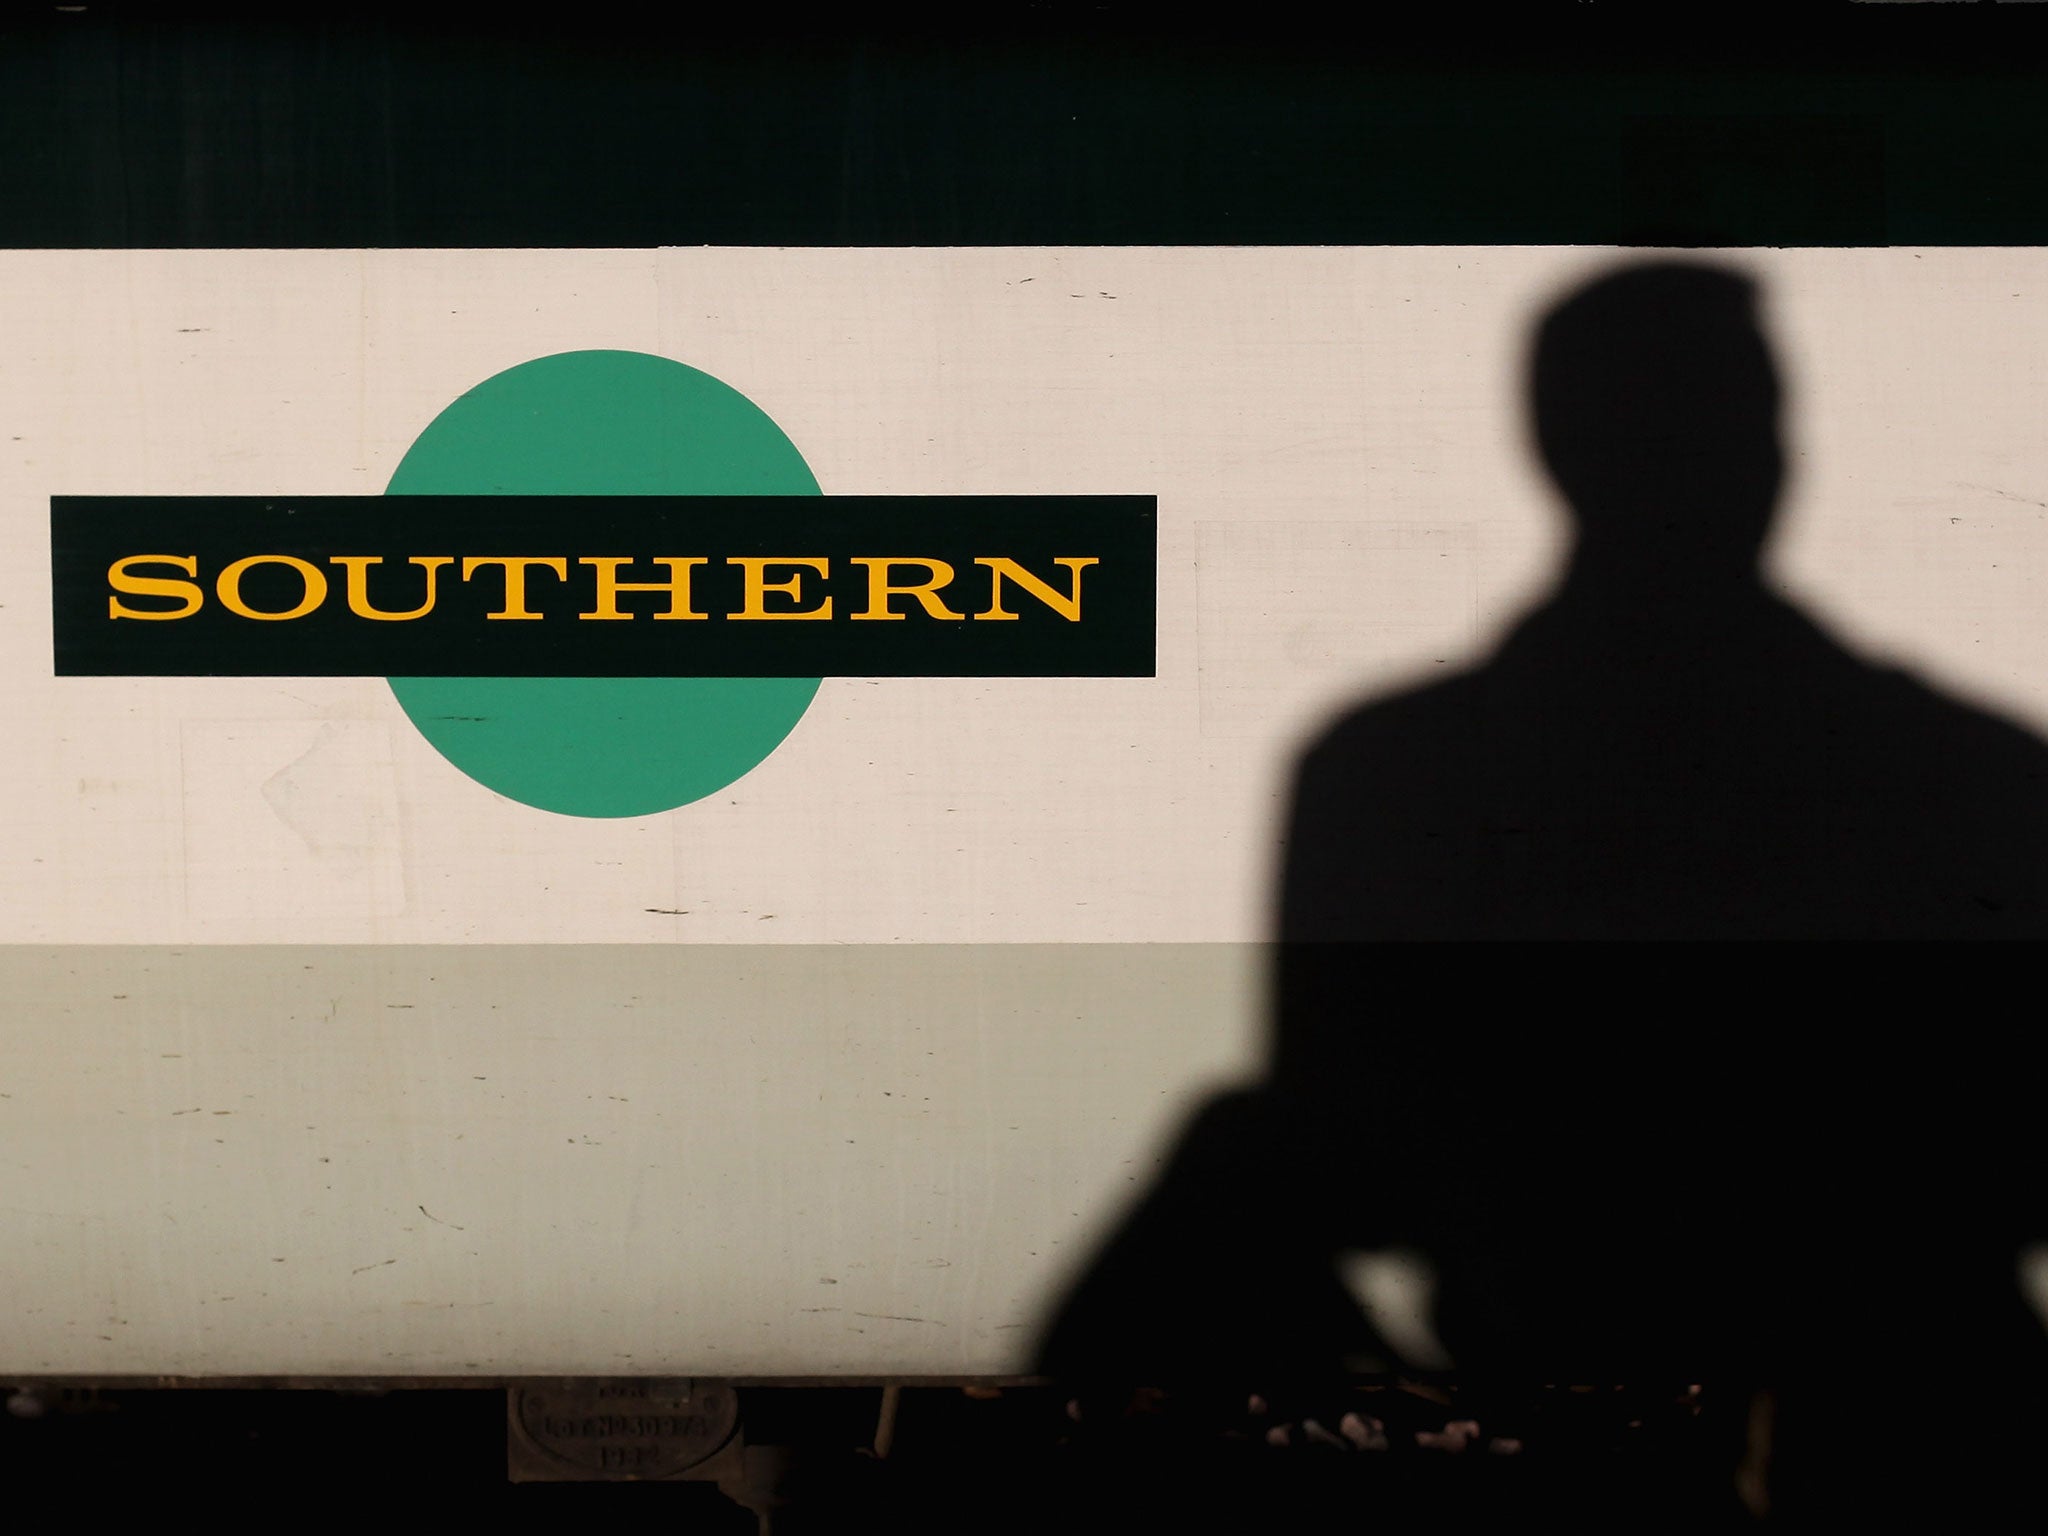 Southern has revealed a new timetable